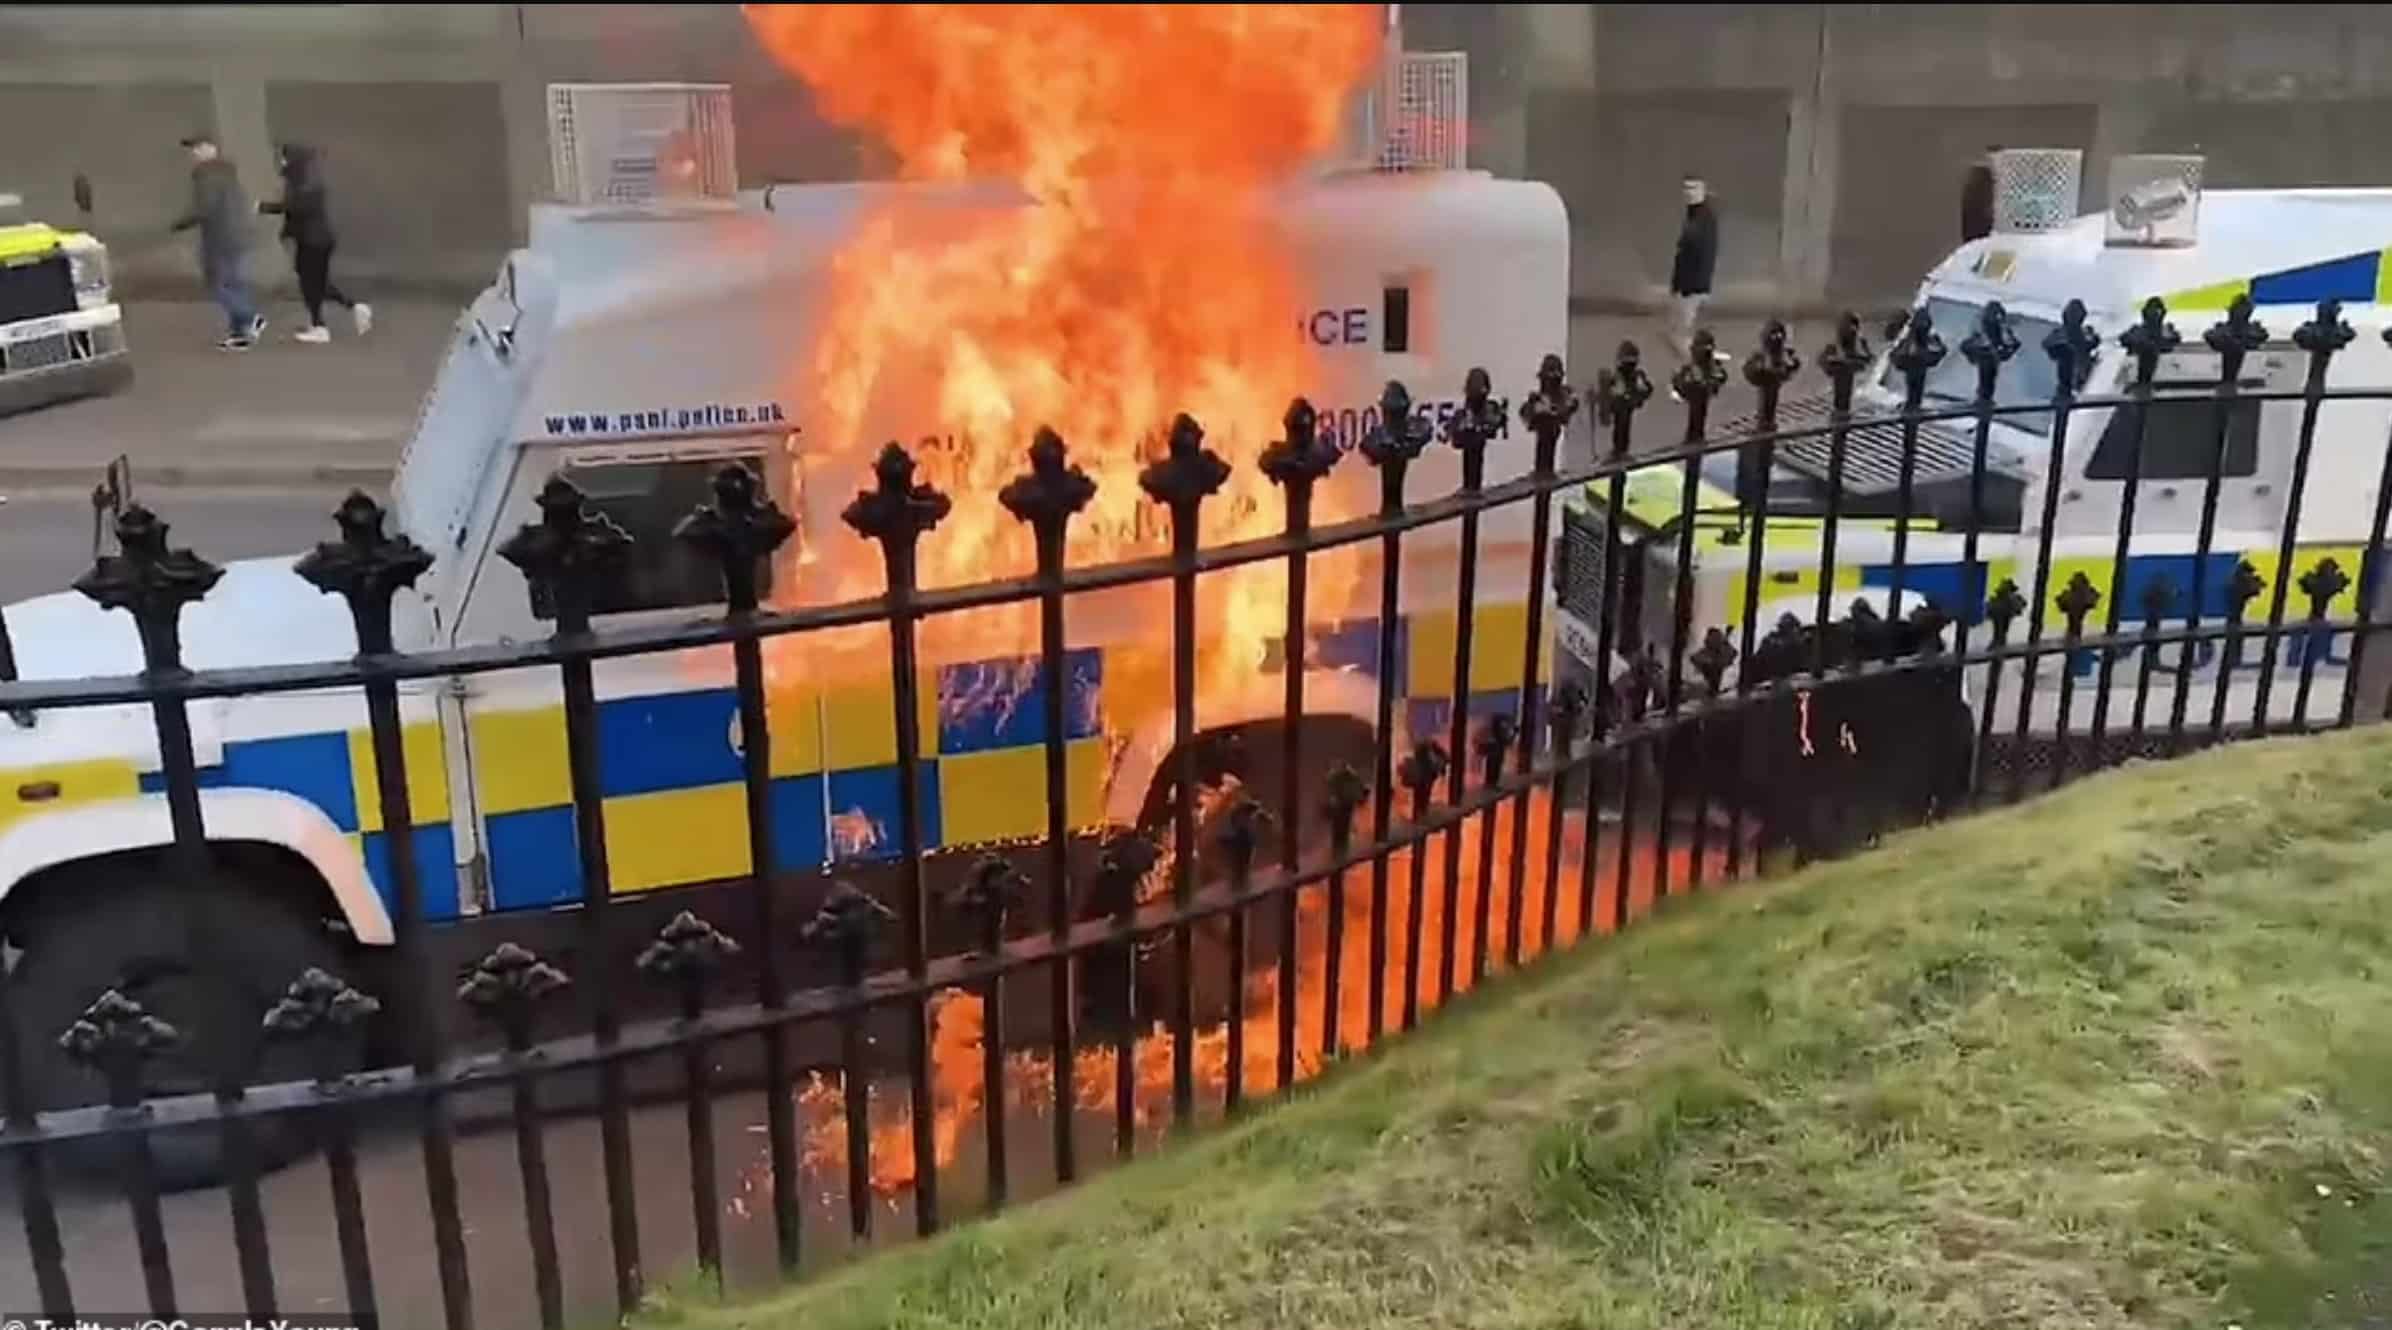 Thugs Target Police Vans With Threw Petrol Bombs in Londonderry, Northern Ireland, United Kingdom - 18 April 2022